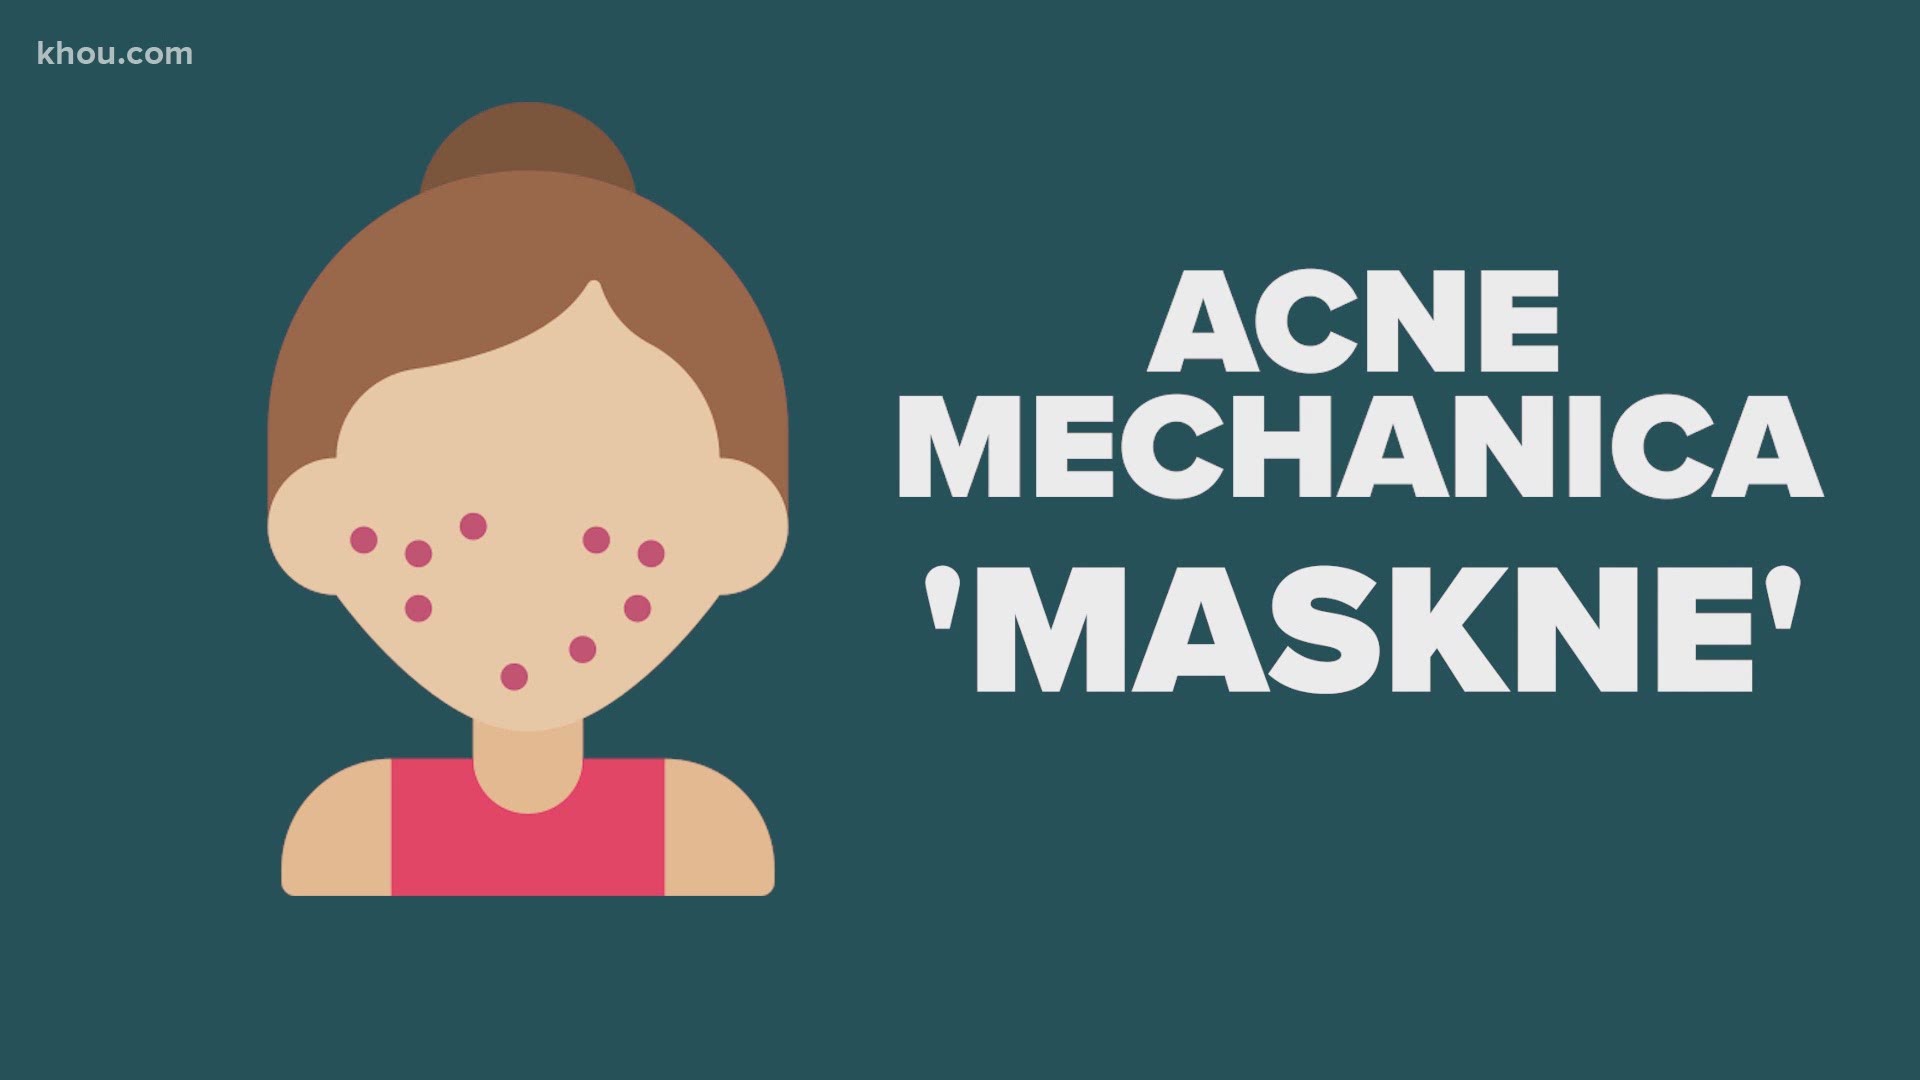 It’s seen most in those who wear a mask for most of the day, but there are things that can help.